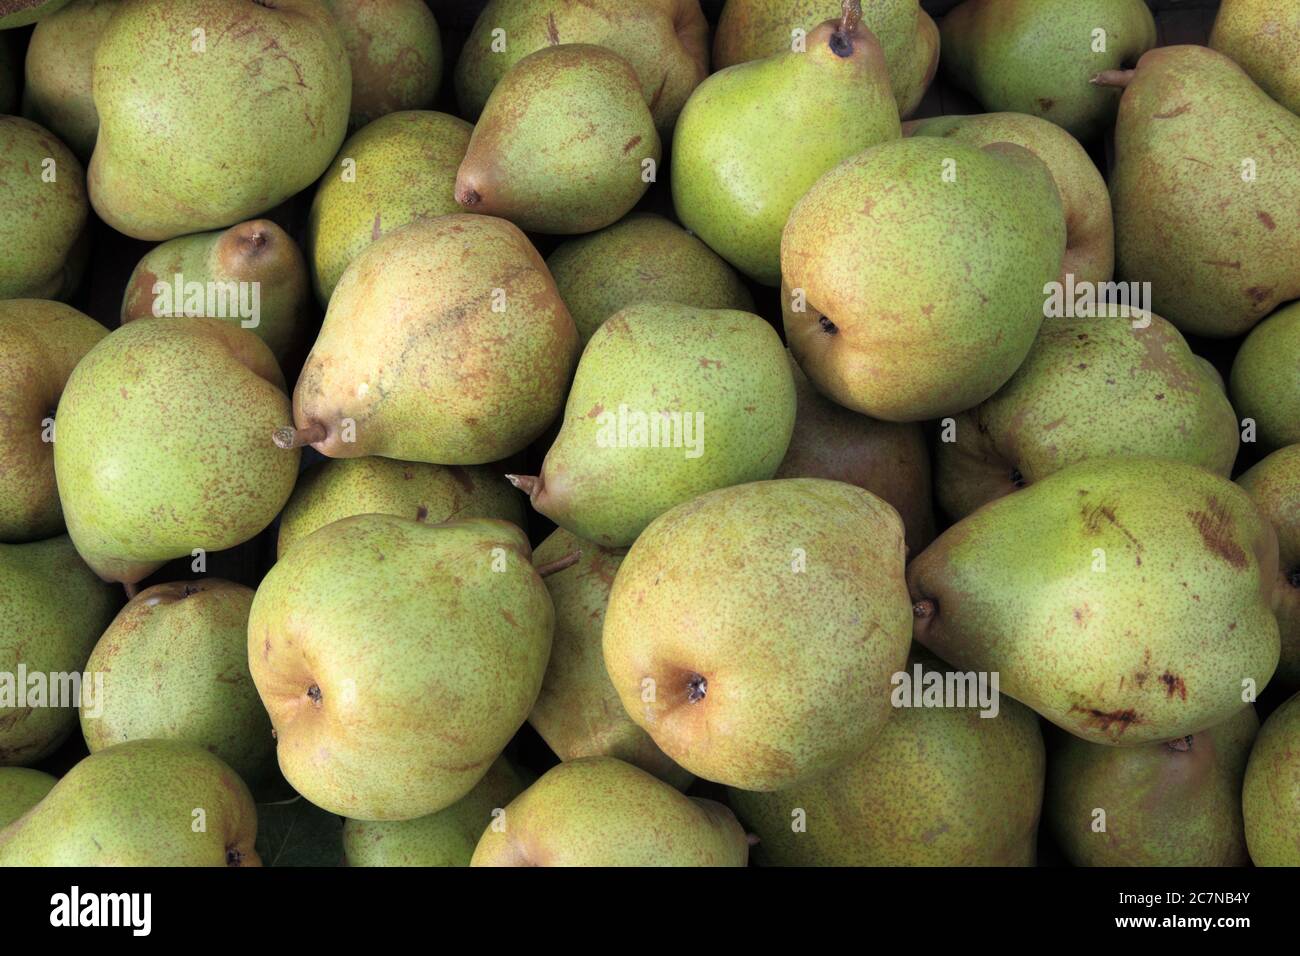 Pear 'Red comice', pears, cookers, cooking pears, Pyrus Communis Stock Photo